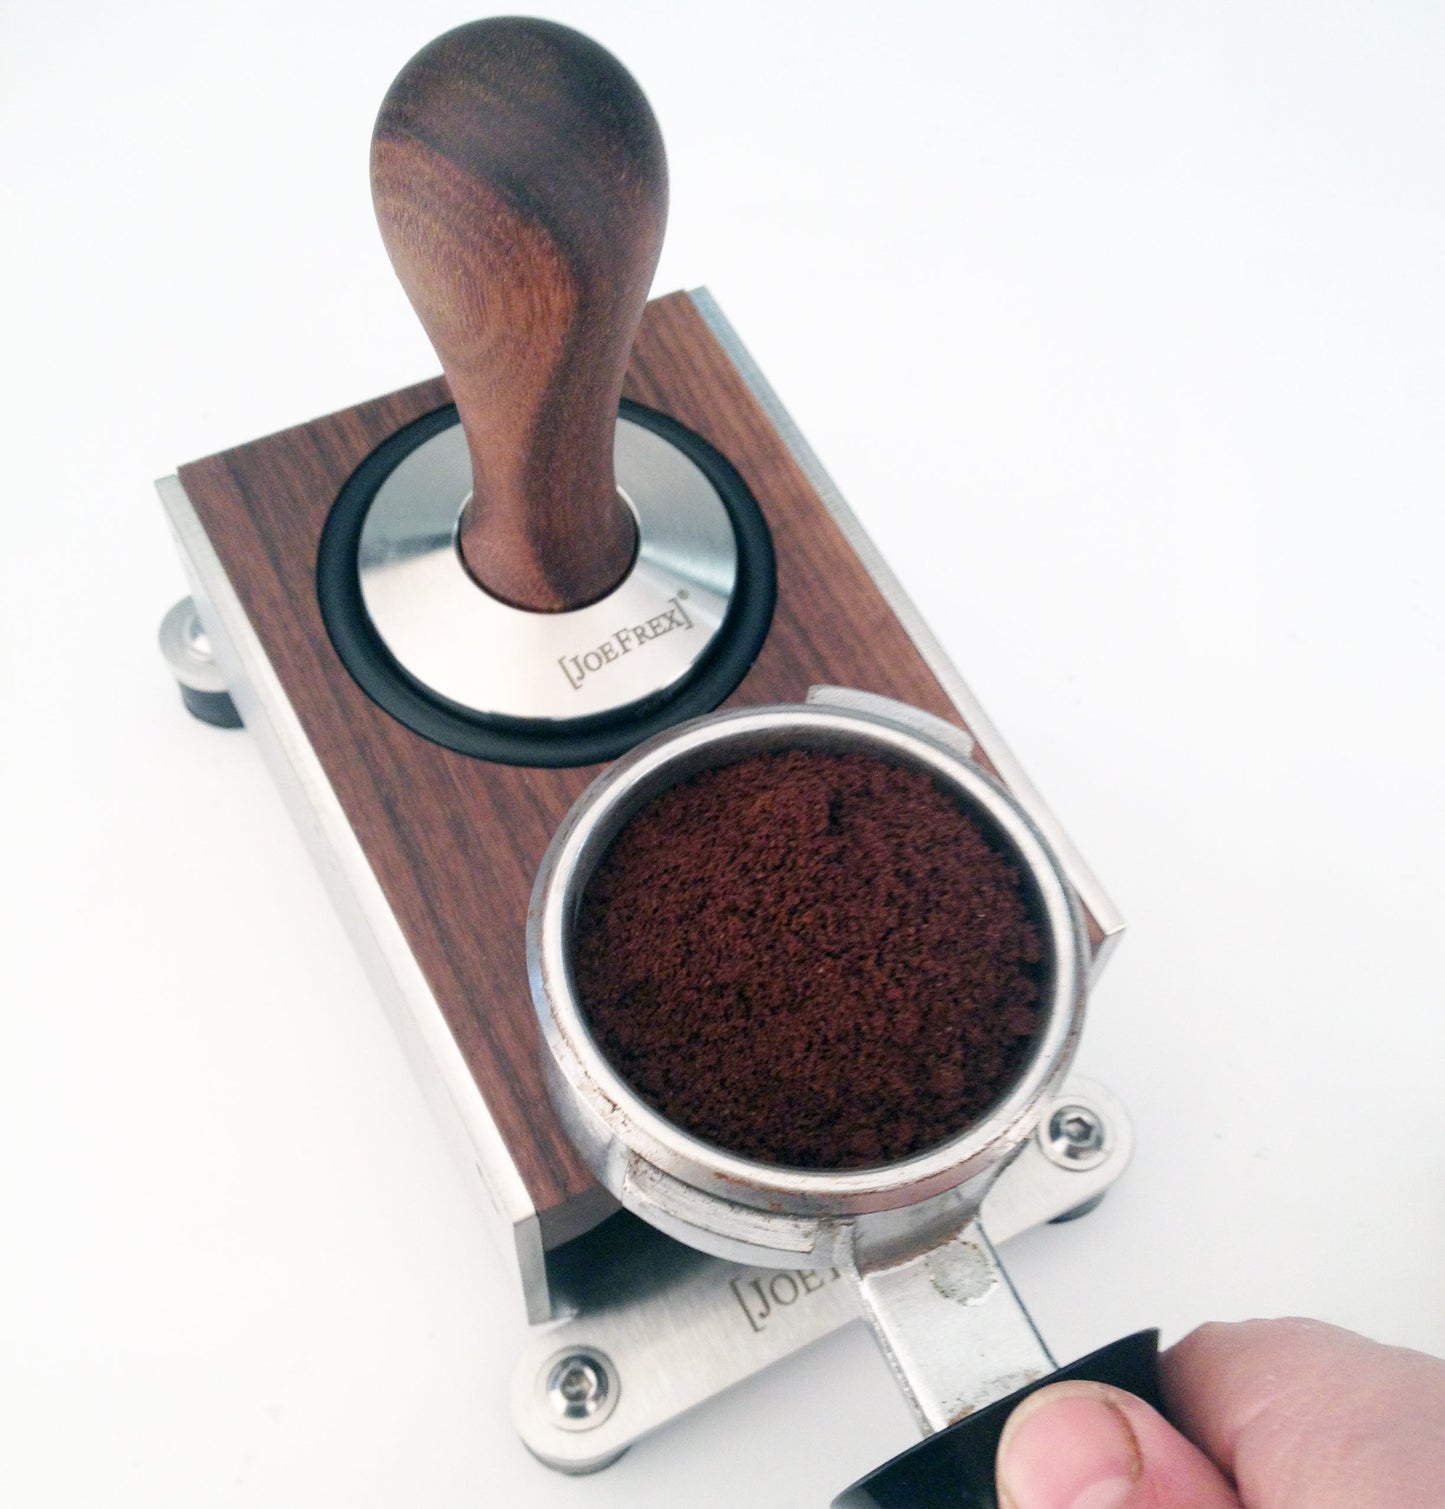 Tamping station walnut with tamper and portafilter and coffee , ready to be pressed